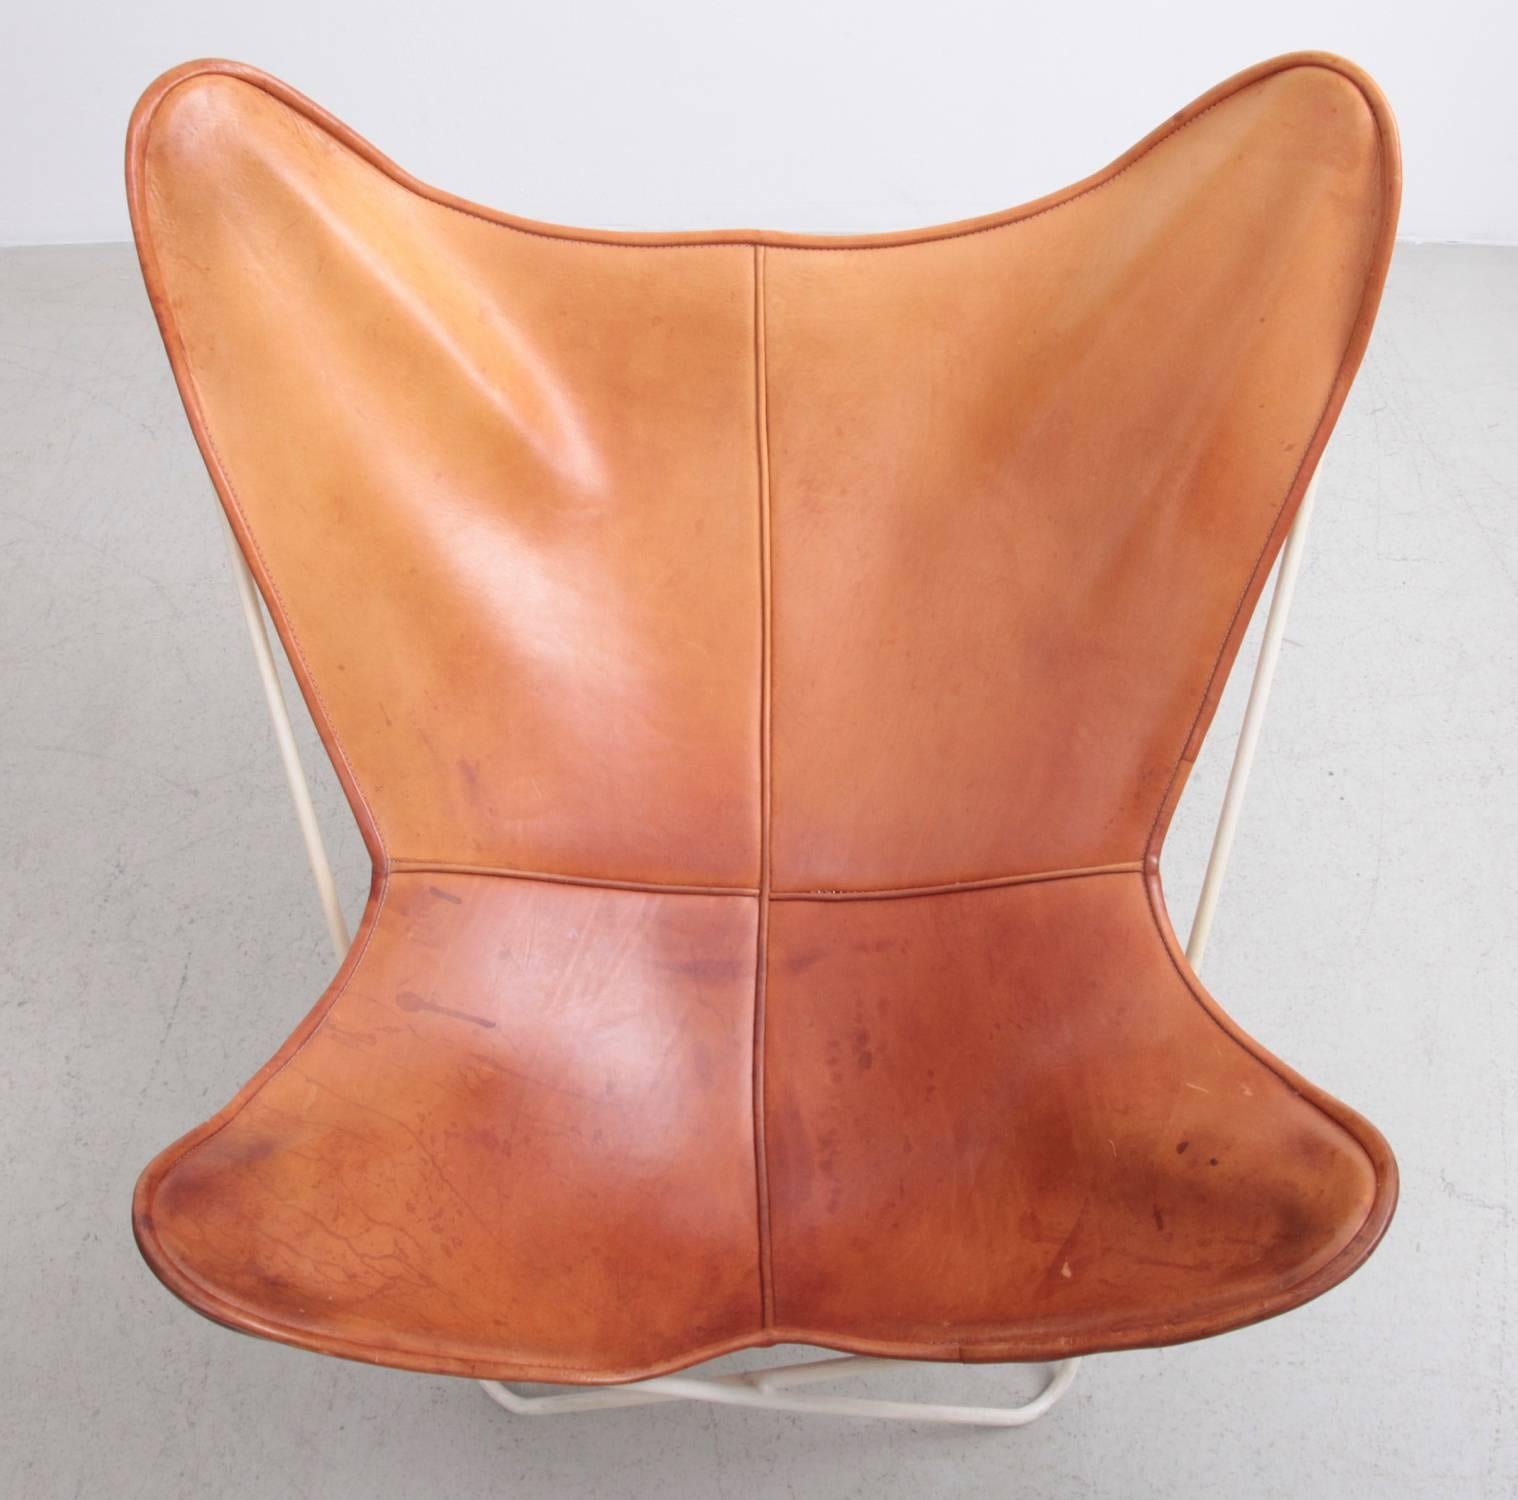 Butterfly chair by Knoll International with exceptionally beautiful original leather in cognac on a white base. Designed by J. Ferrari-Hardoy, J. Kurchan, A. Bonet in 1938. Manufactured from 1947-1975 by Knoll International. An absolute authentic